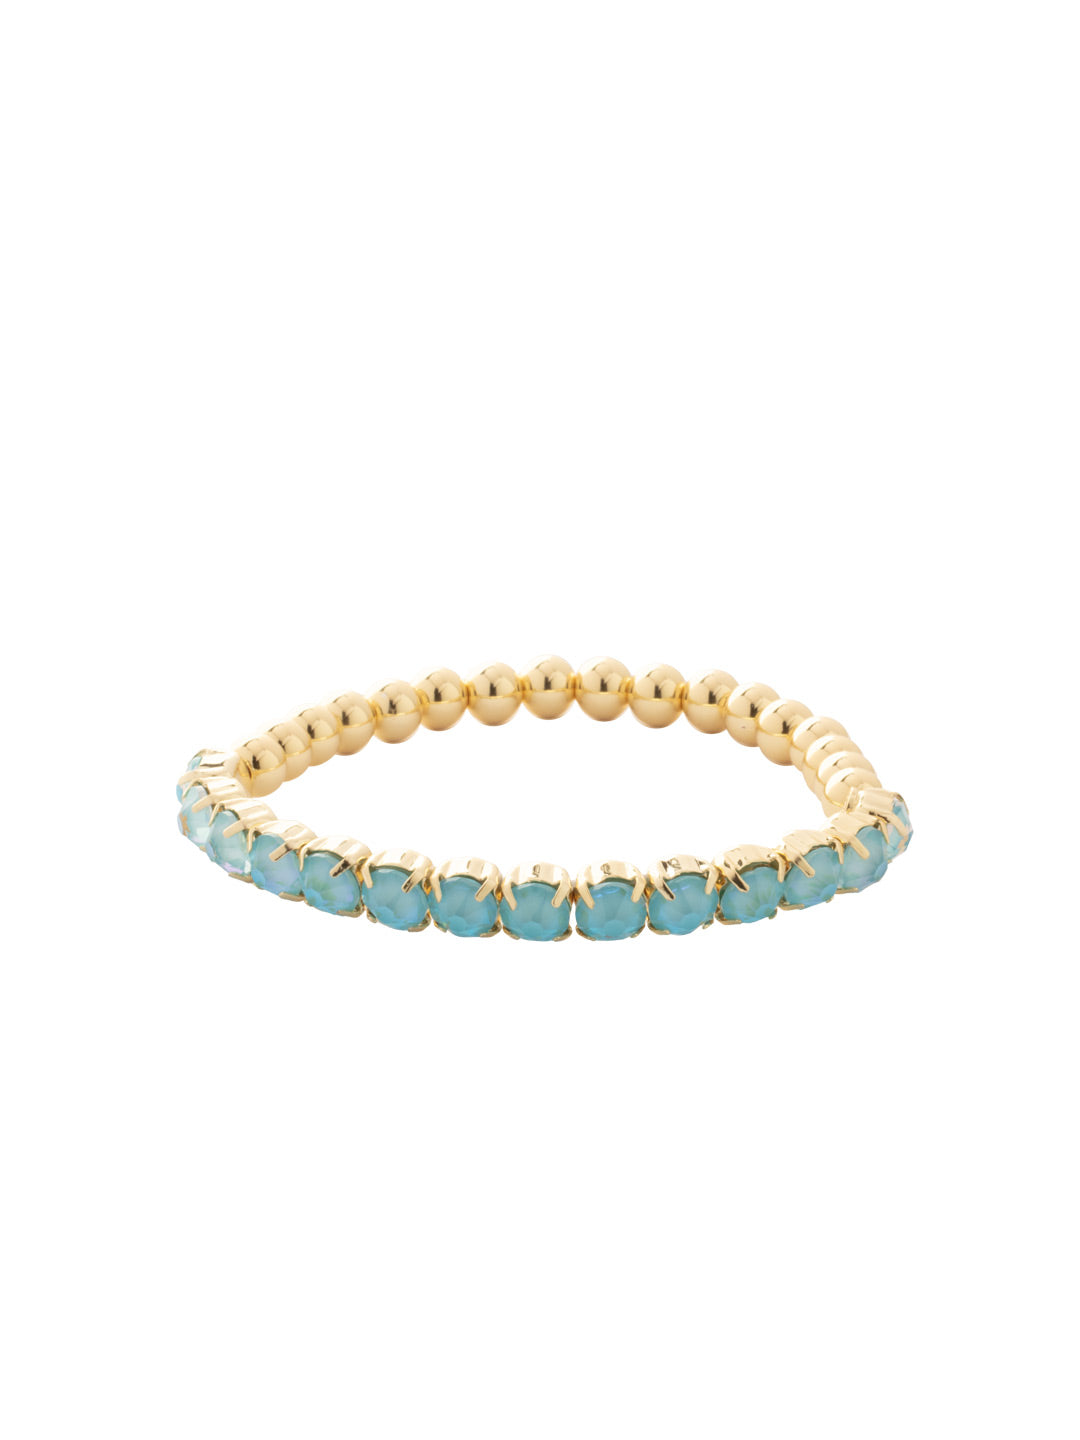 Mini Crystal Mini Zola Stretch Bracelet - BFN23BGSBD - <p>The Mini Crystal Mini Zola Stretch Bracelet features round cut crystals and metal beads on a sturdy jewelers' filament, stretching to fit most wrists comfortably, without the hassle of a clasp! (7 inches in diameter, fits average wrist sizes) From Sorrelli's Summer Blue Delite collection in our Bright Gold-tone finish.</p>